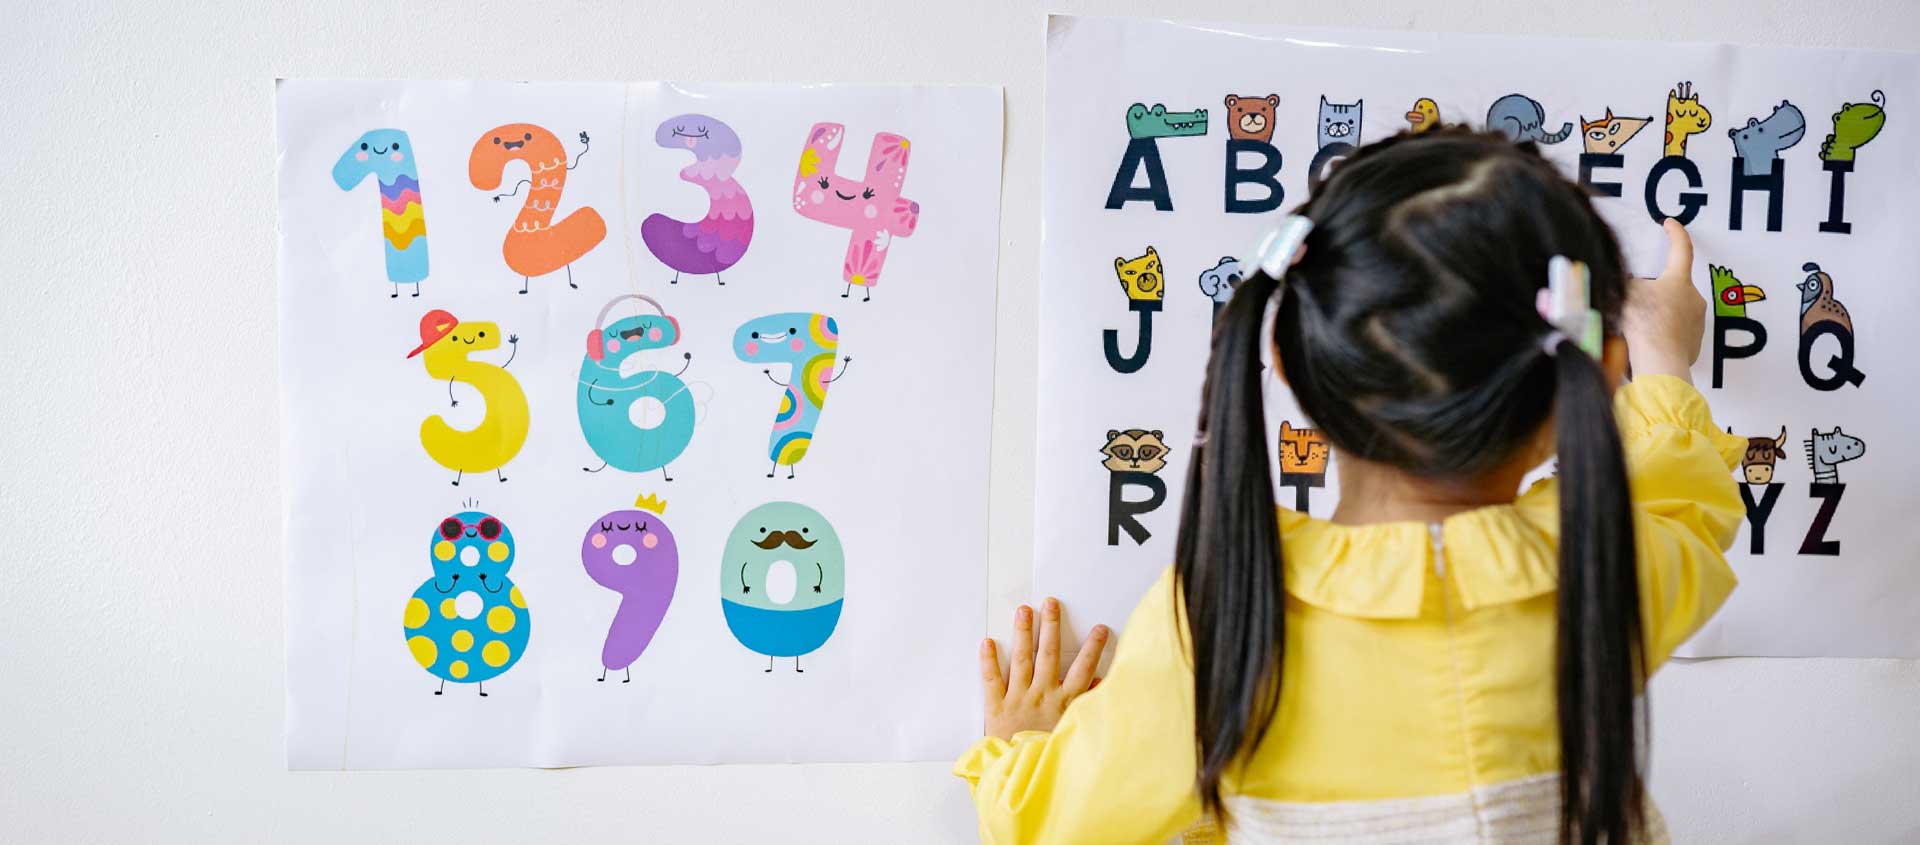 A dark-hared girl with pigtails points to letters on a poster.